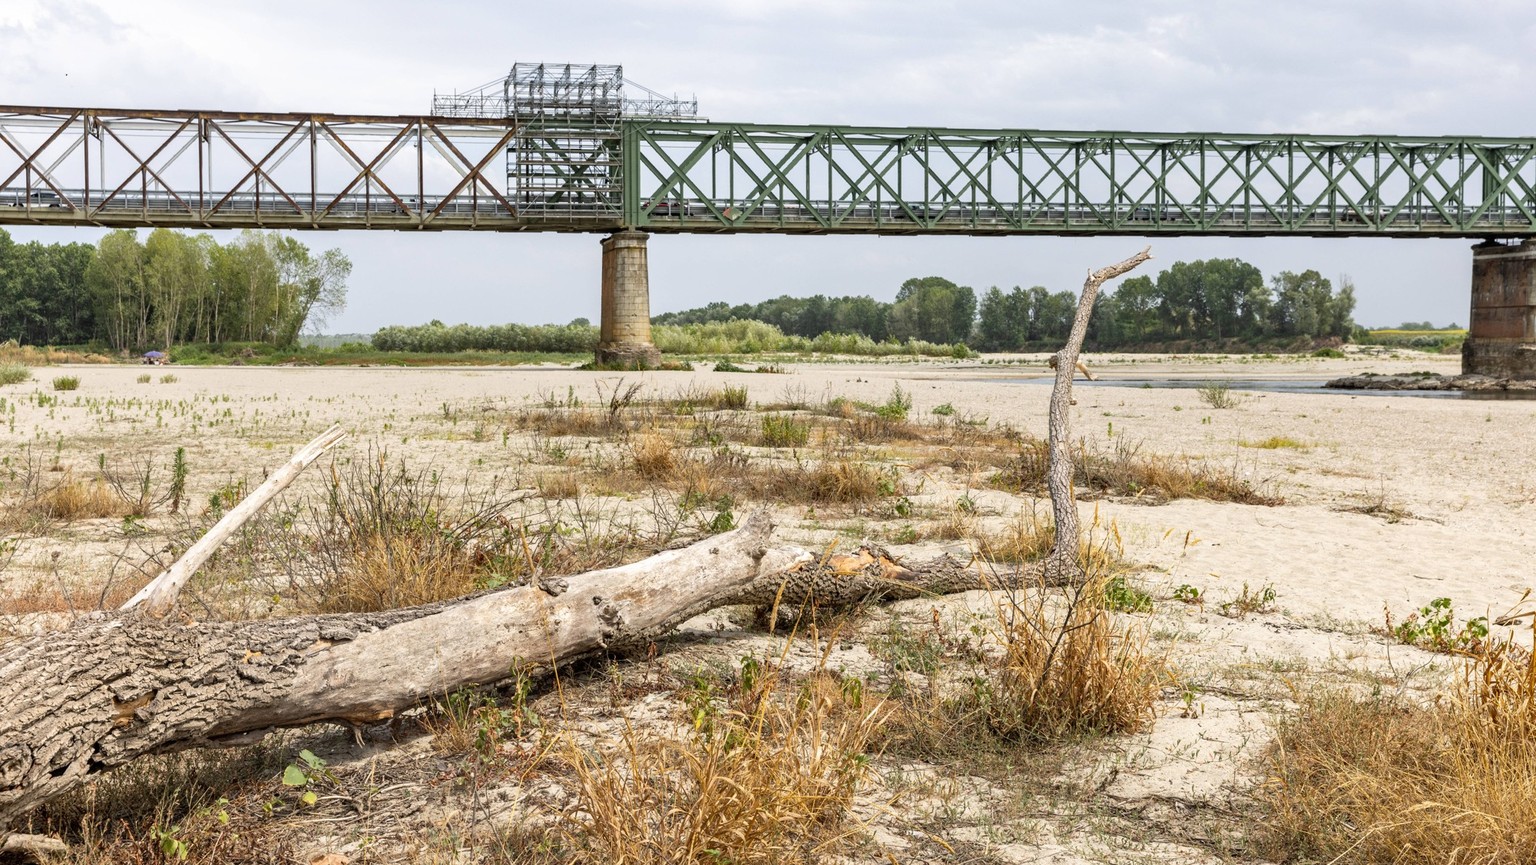 23.6.2022
Drought In Northern Italy: The Aridity Of The Ticino River. A view of the Ticino rivers near Ponte Della Becca a bridge on the confluence of the Ticino and Po rivers, near Pavia. The situati ...